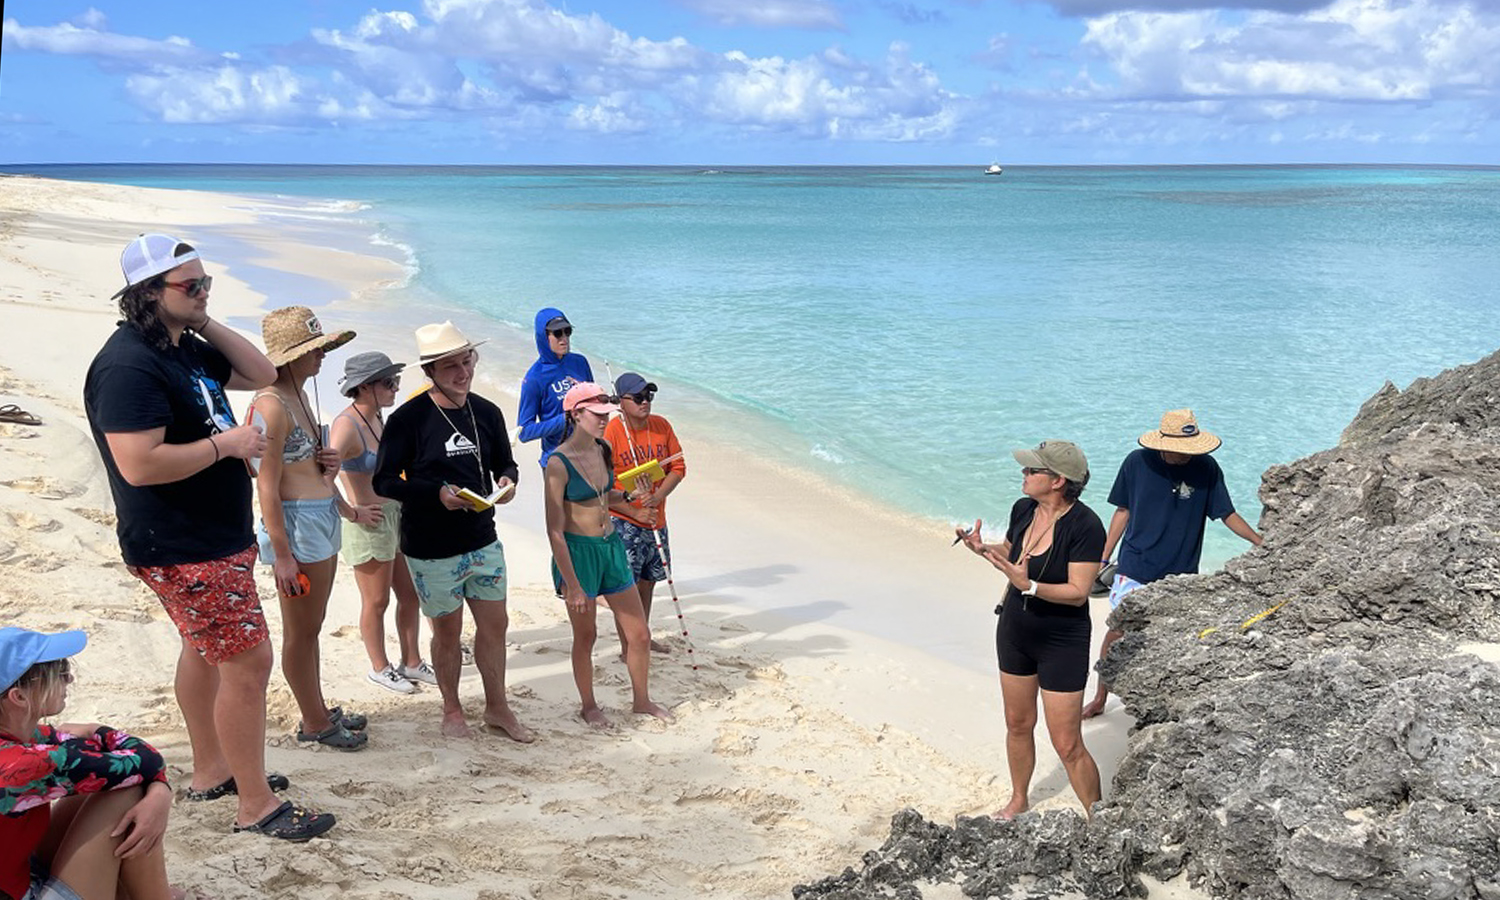 In the Bahamas, Professor of Geoscience Nan Crystal Arens leads a January-term study abroad program to study the island’s geology.